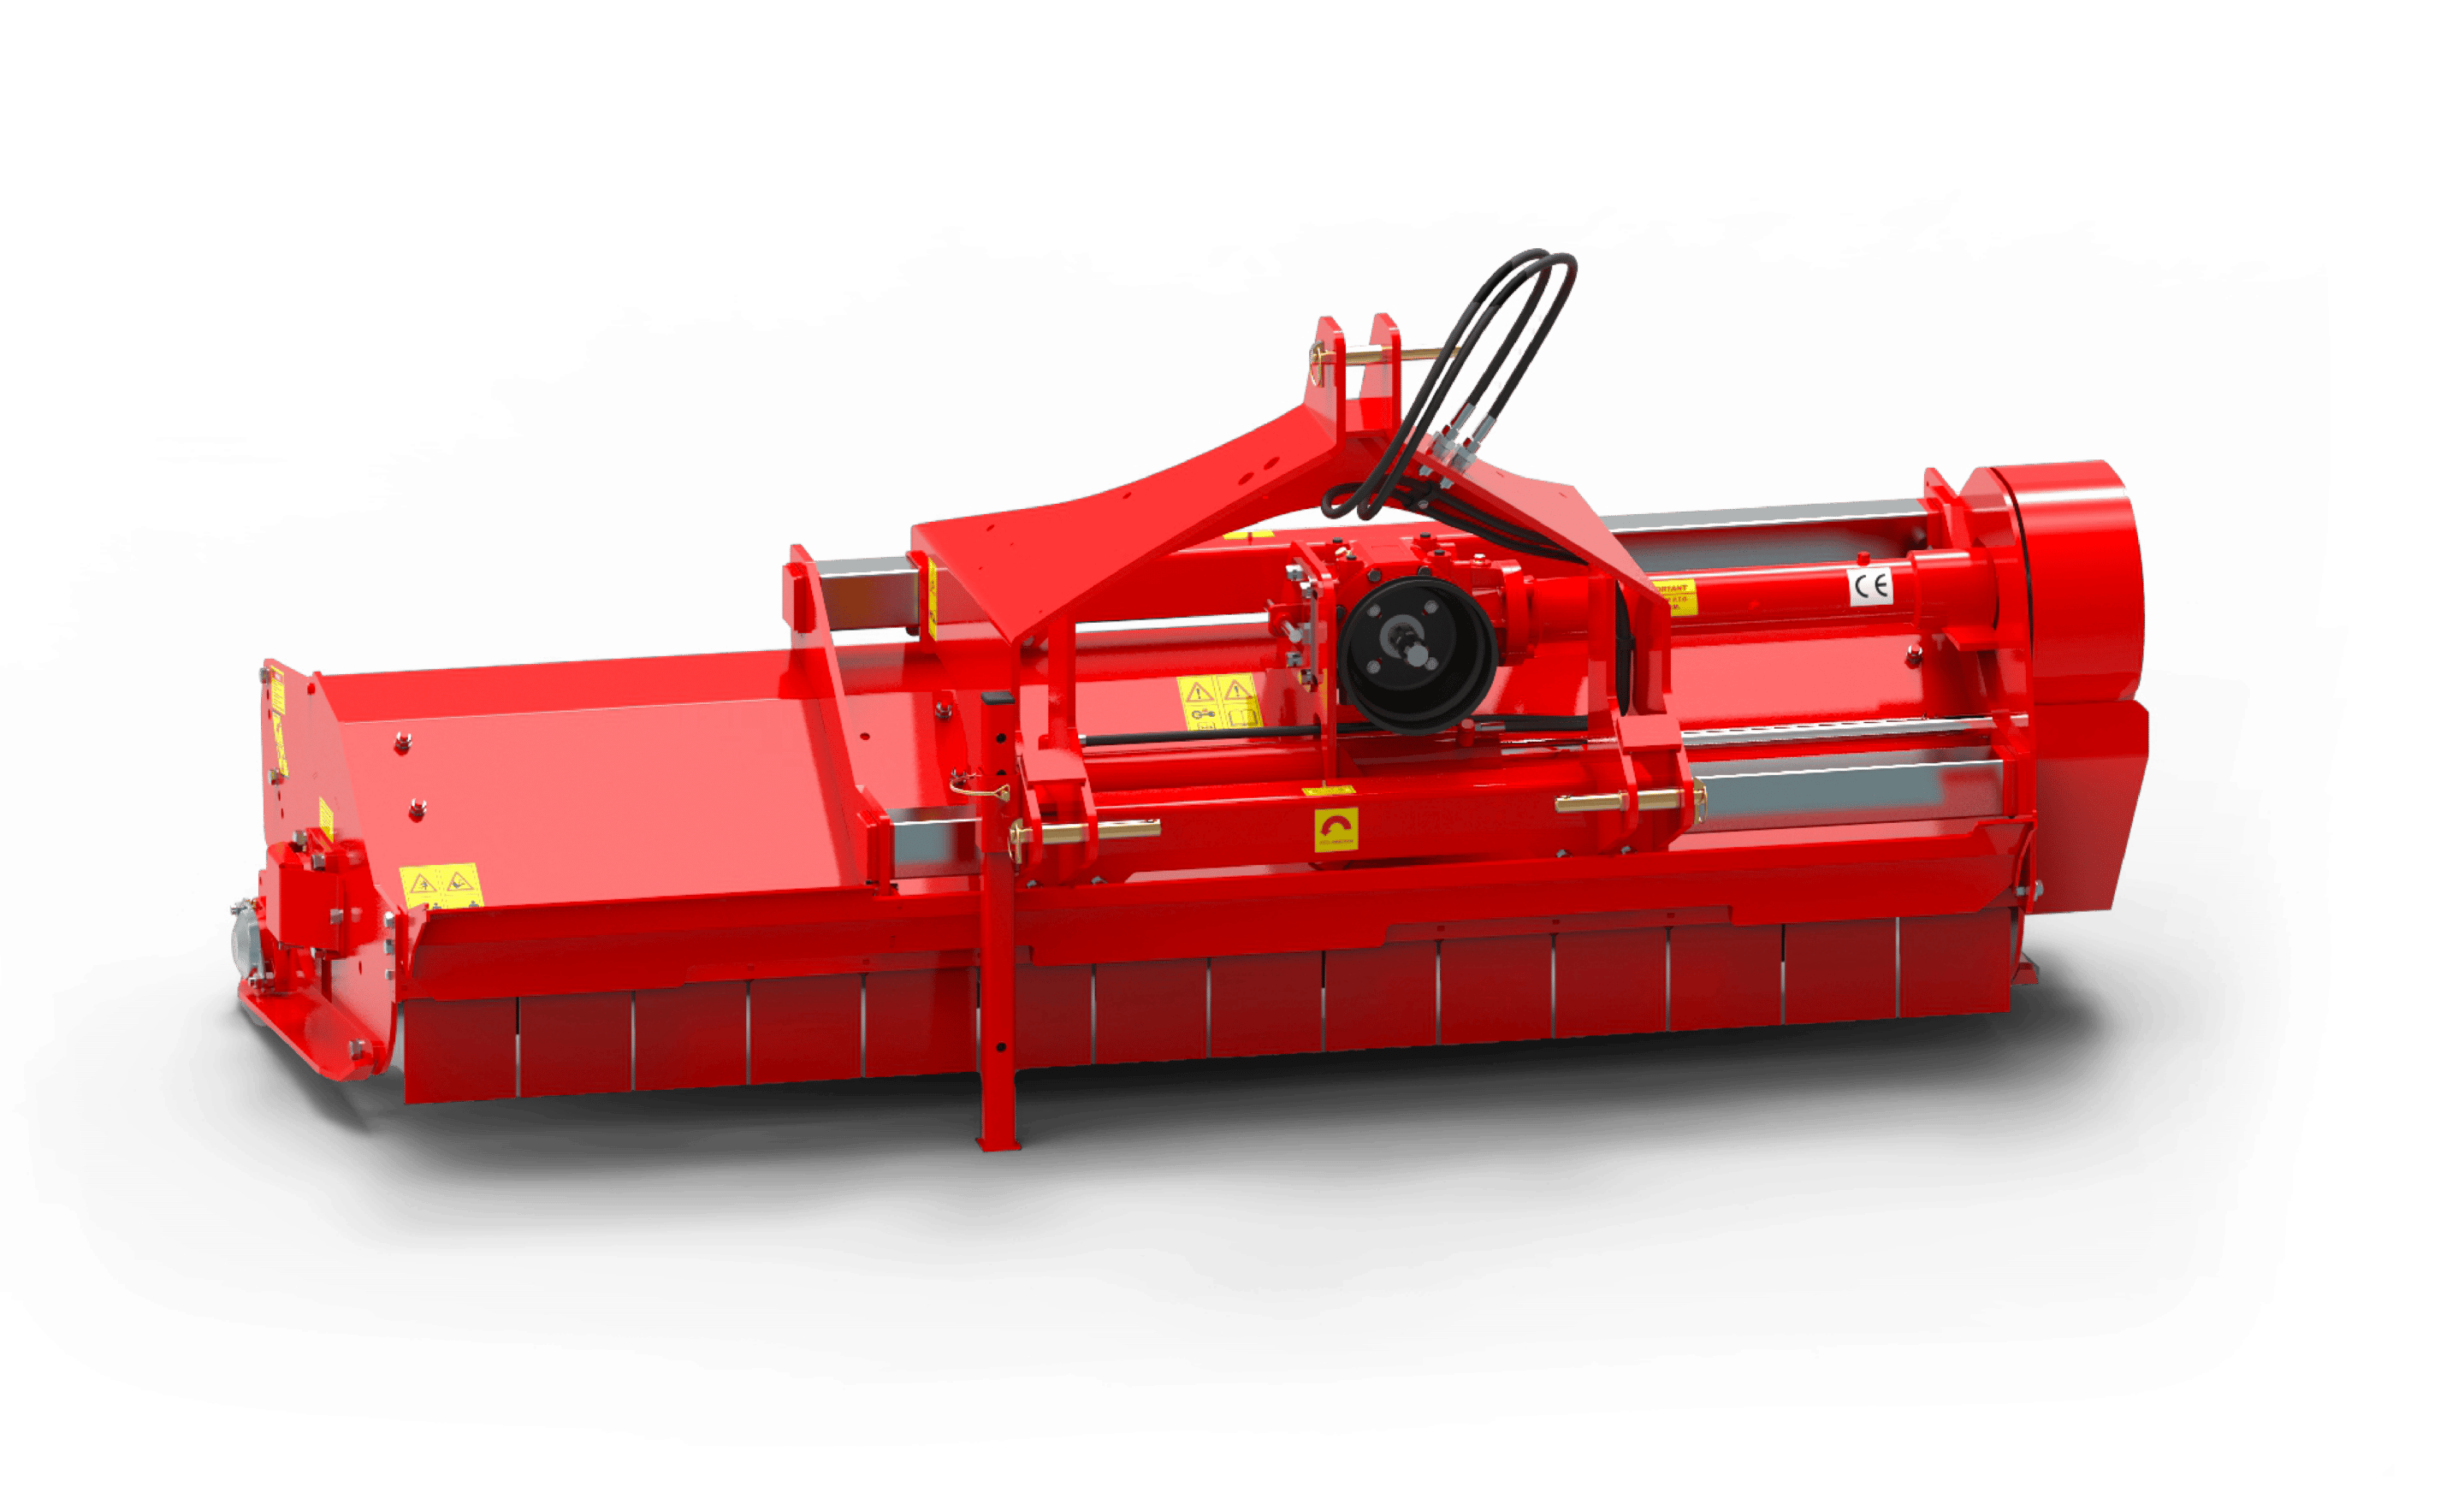 Warlord S3 lawn mower red